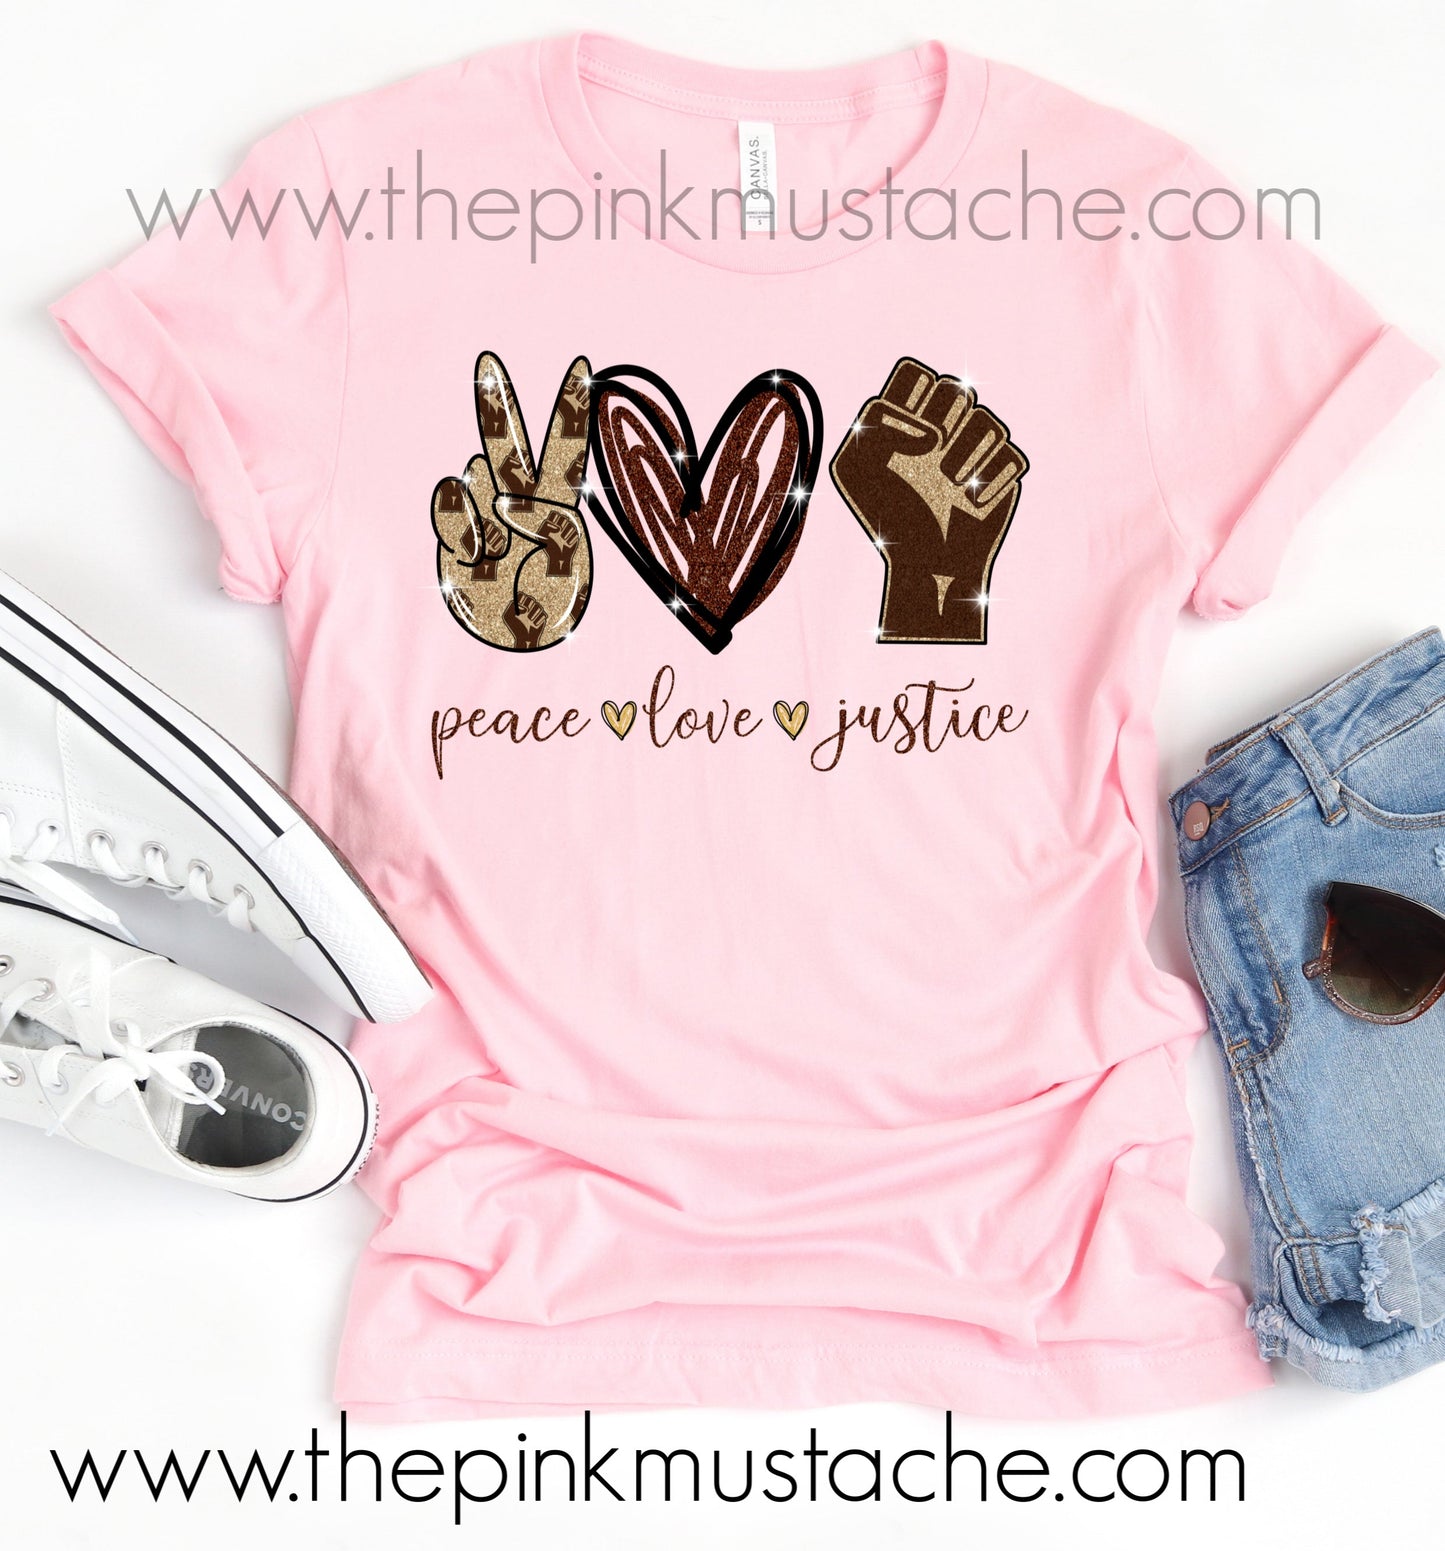 Peace Love Jusice Tee / Black Lives Matter Unity Collection / Unisex Bella Canvas Tee / 2T-Adult XXXL